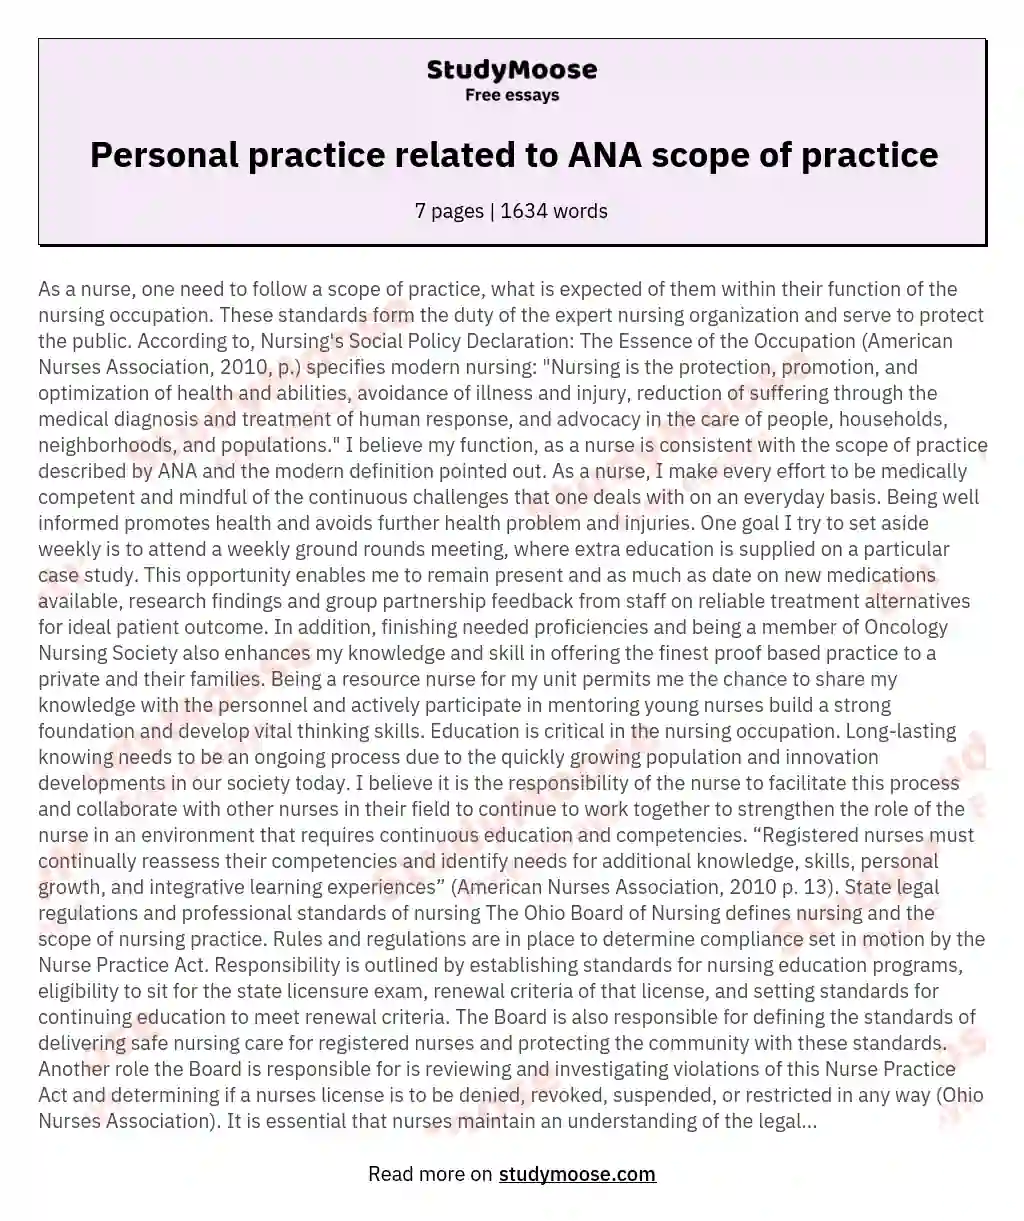 Personal practice related to ANA scope of practice